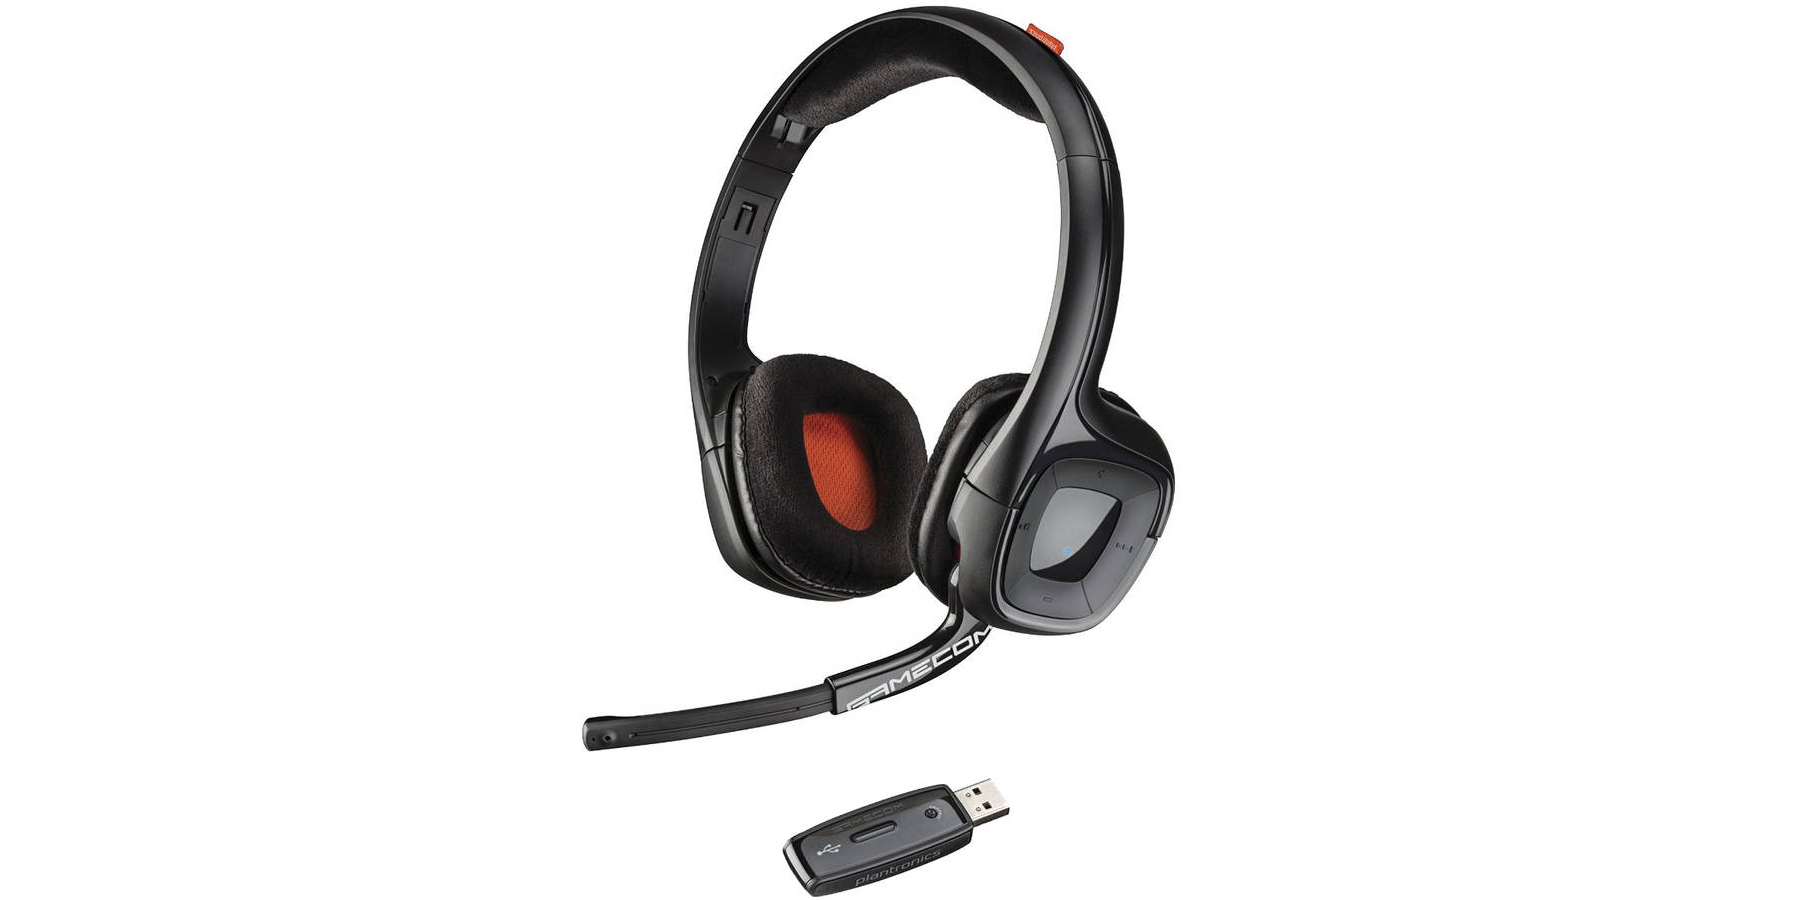 Plantronics Gamecom 818 Wireless Stereo Headset for PC, Mac and PlayStation 4—$19.96! (Reg $79.96)